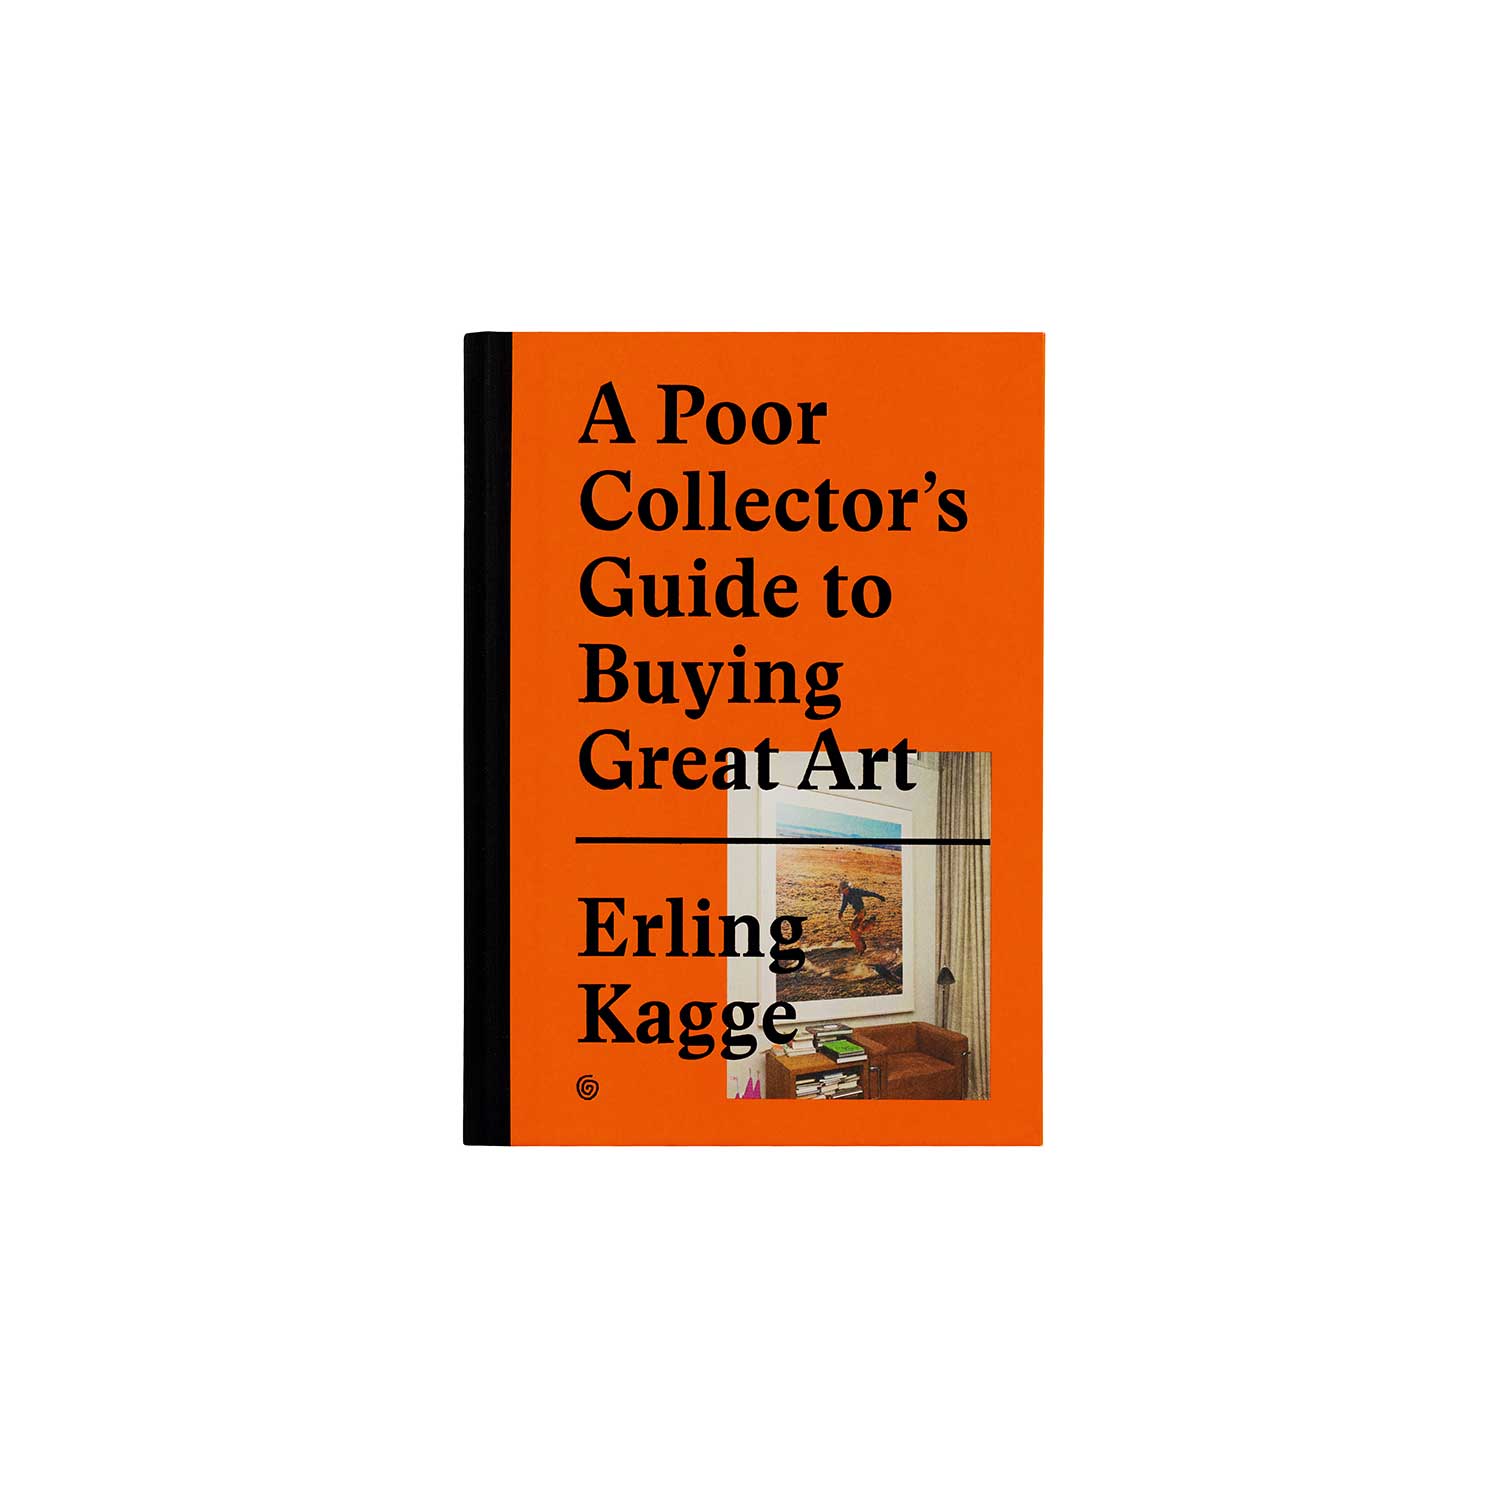 A Poor Collector’s Guide to Buying Great Art Book